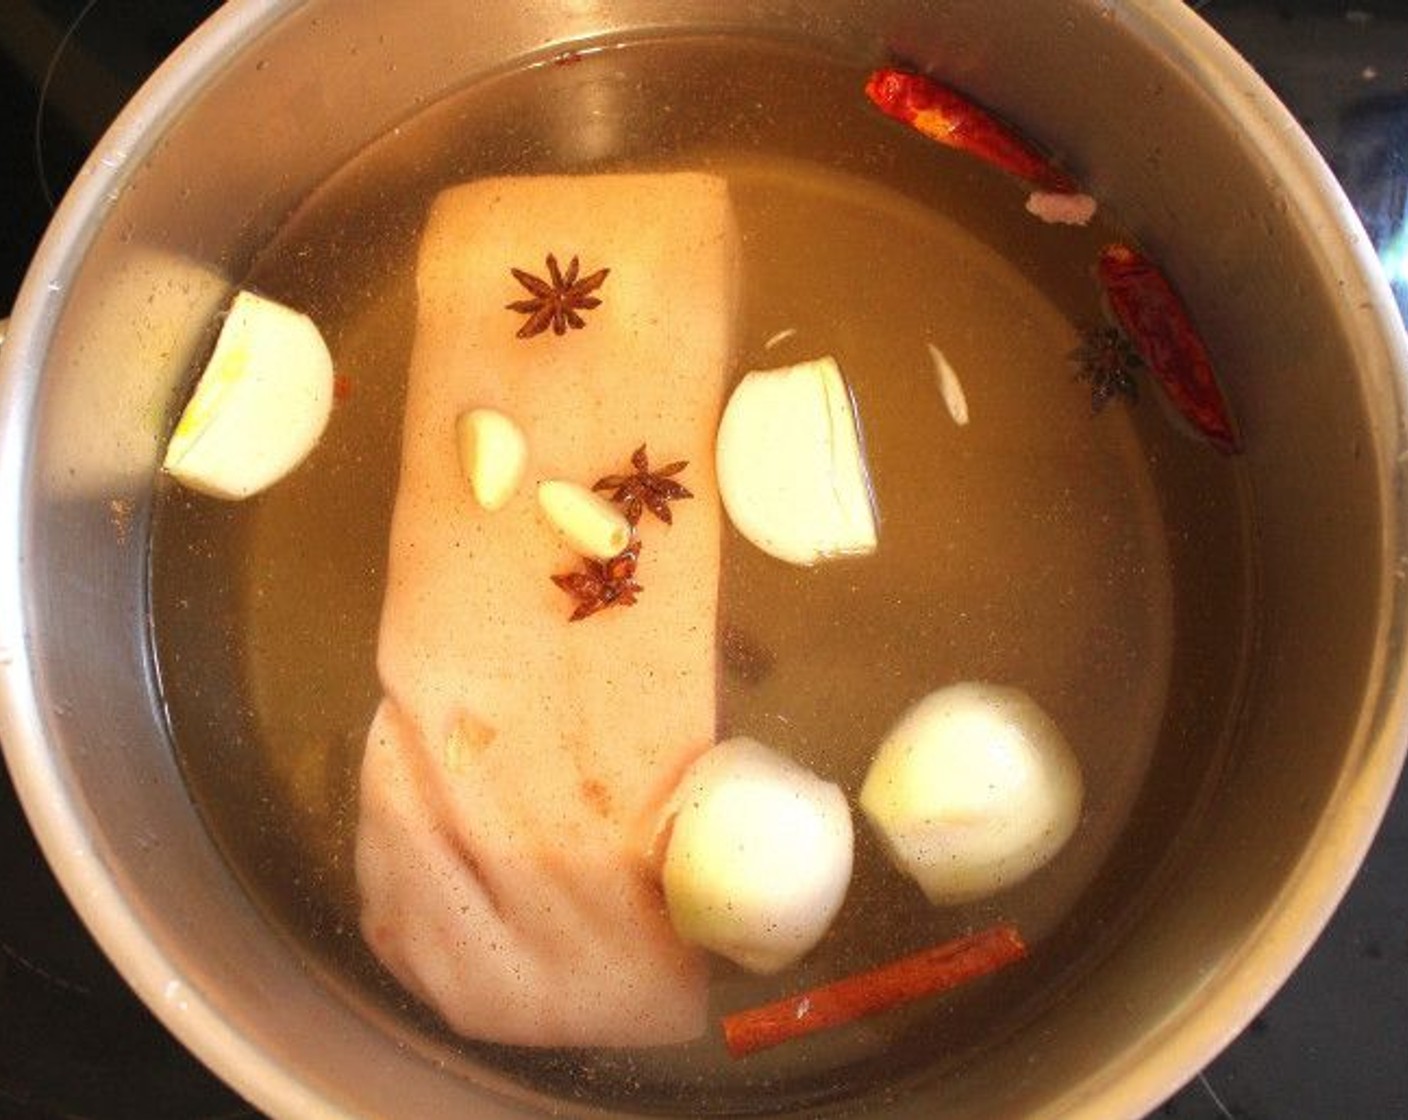 step 1 To a pot, add in Water (16 cups), Onion (1), Garlic (2 cloves), Star Anise (4), Cinnamon Sticks (2), Dried Chili Peppers (2), and Kosher Salt (to taste).